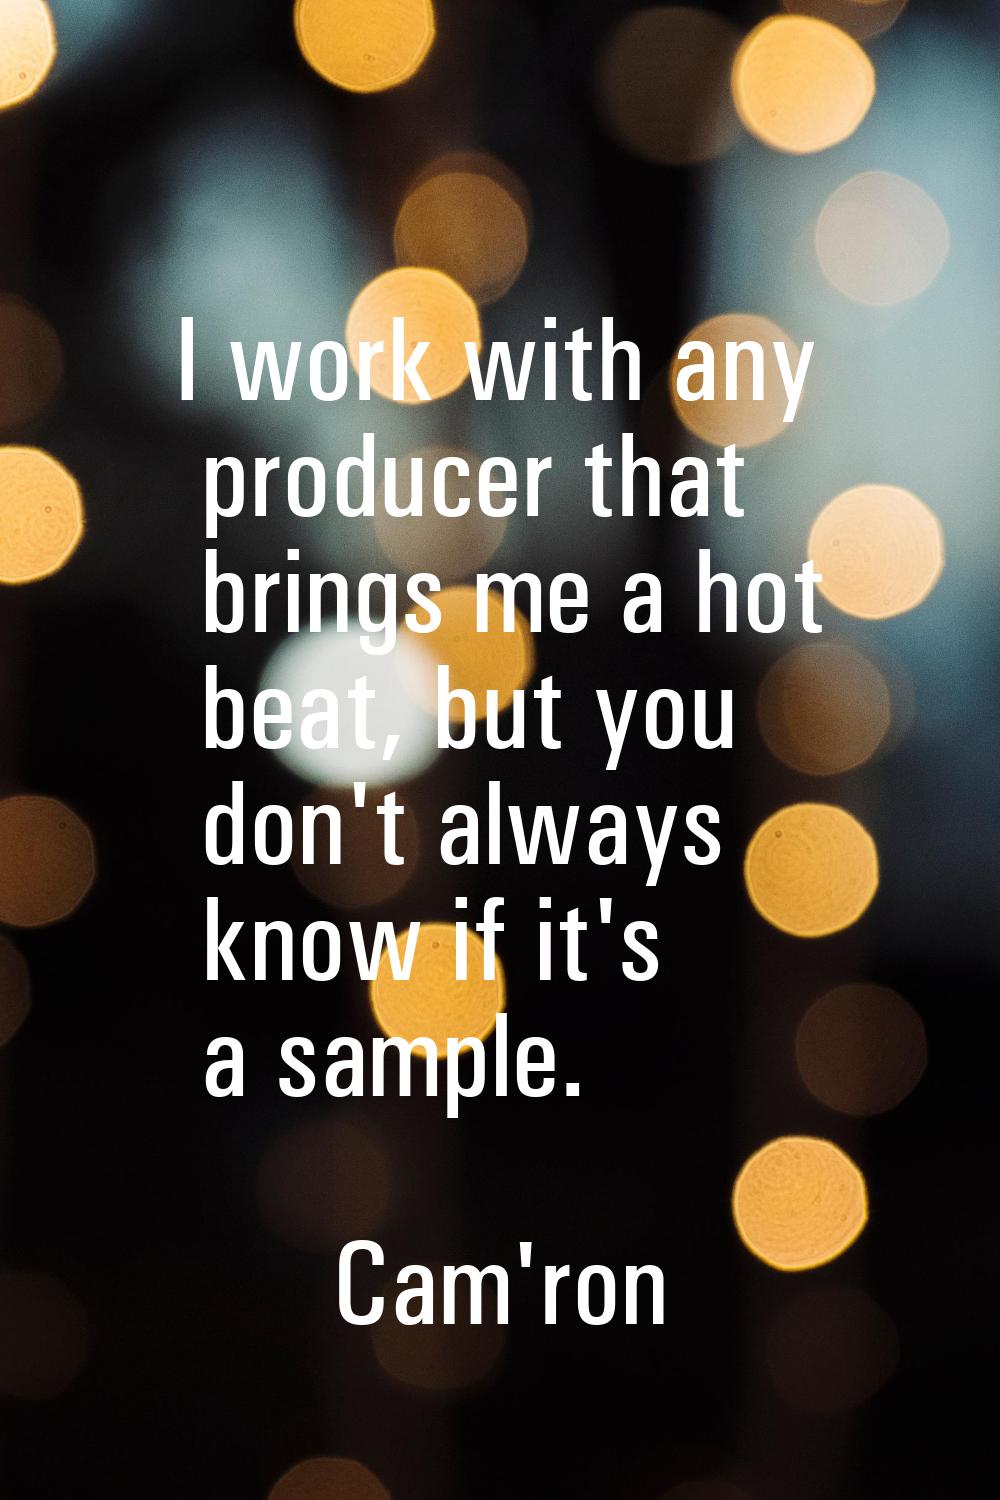 I work with any producer that brings me a hot beat, but you don't always know if it's a sample.